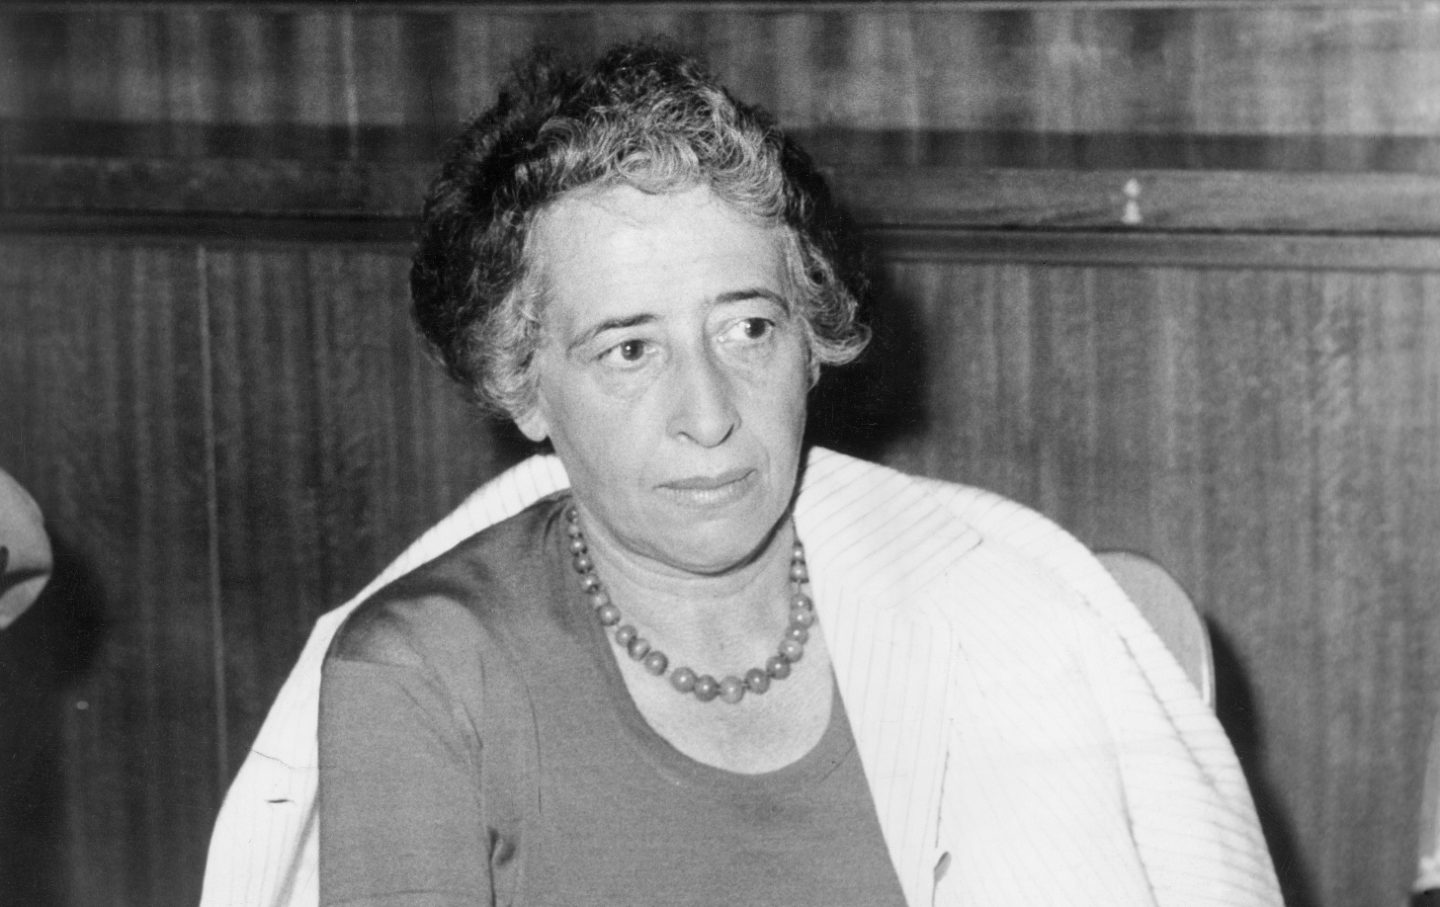 Hannah Arendt, in a black and white photograph, sits in front of a wood paneled wall wearing a white jacket